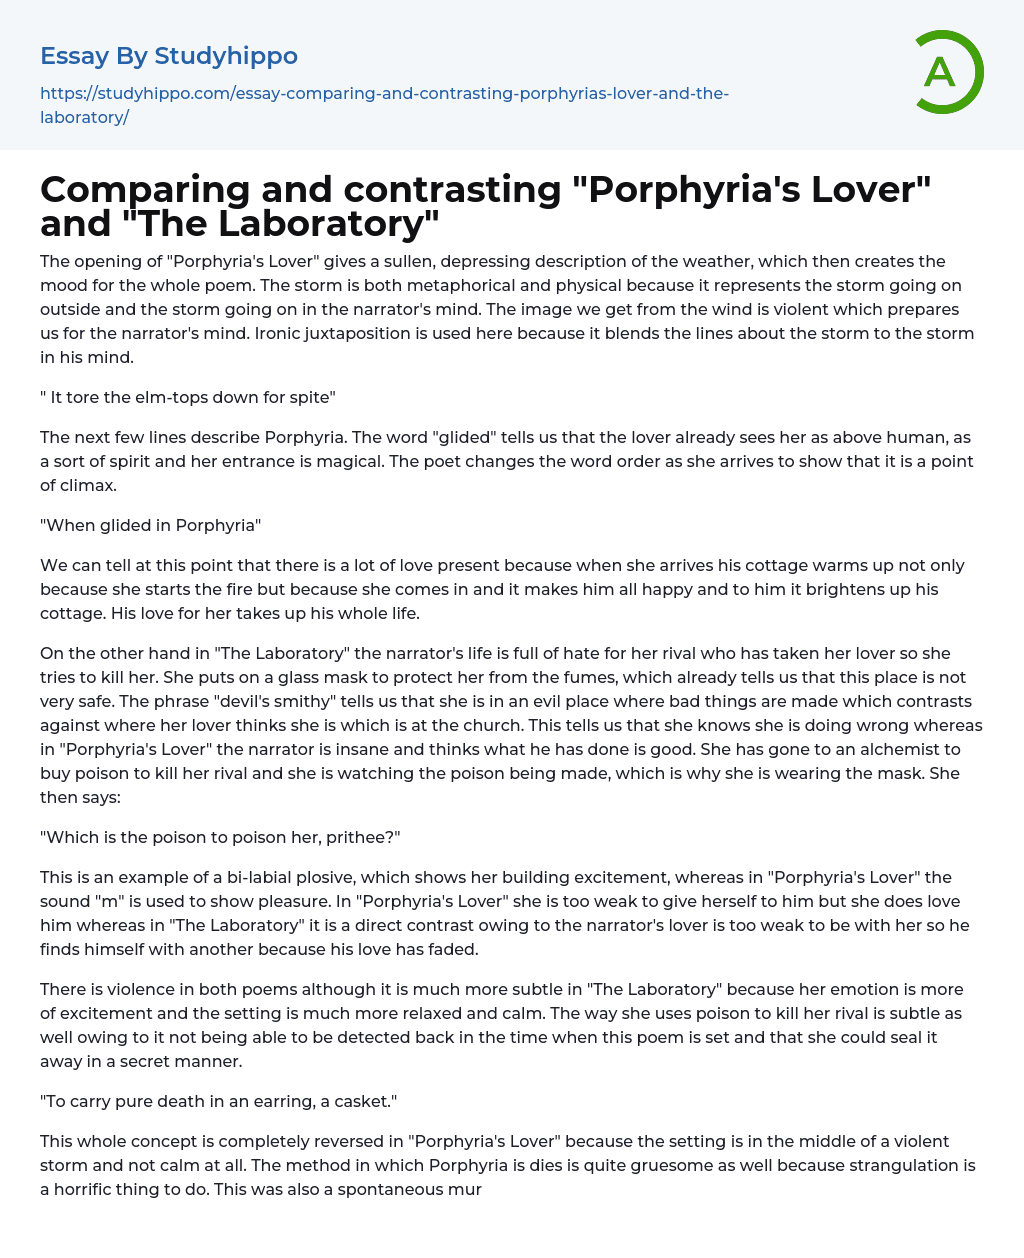 Comparing and contrasting “Porphyria’s Lover” and “The Laboratory” Essay Example